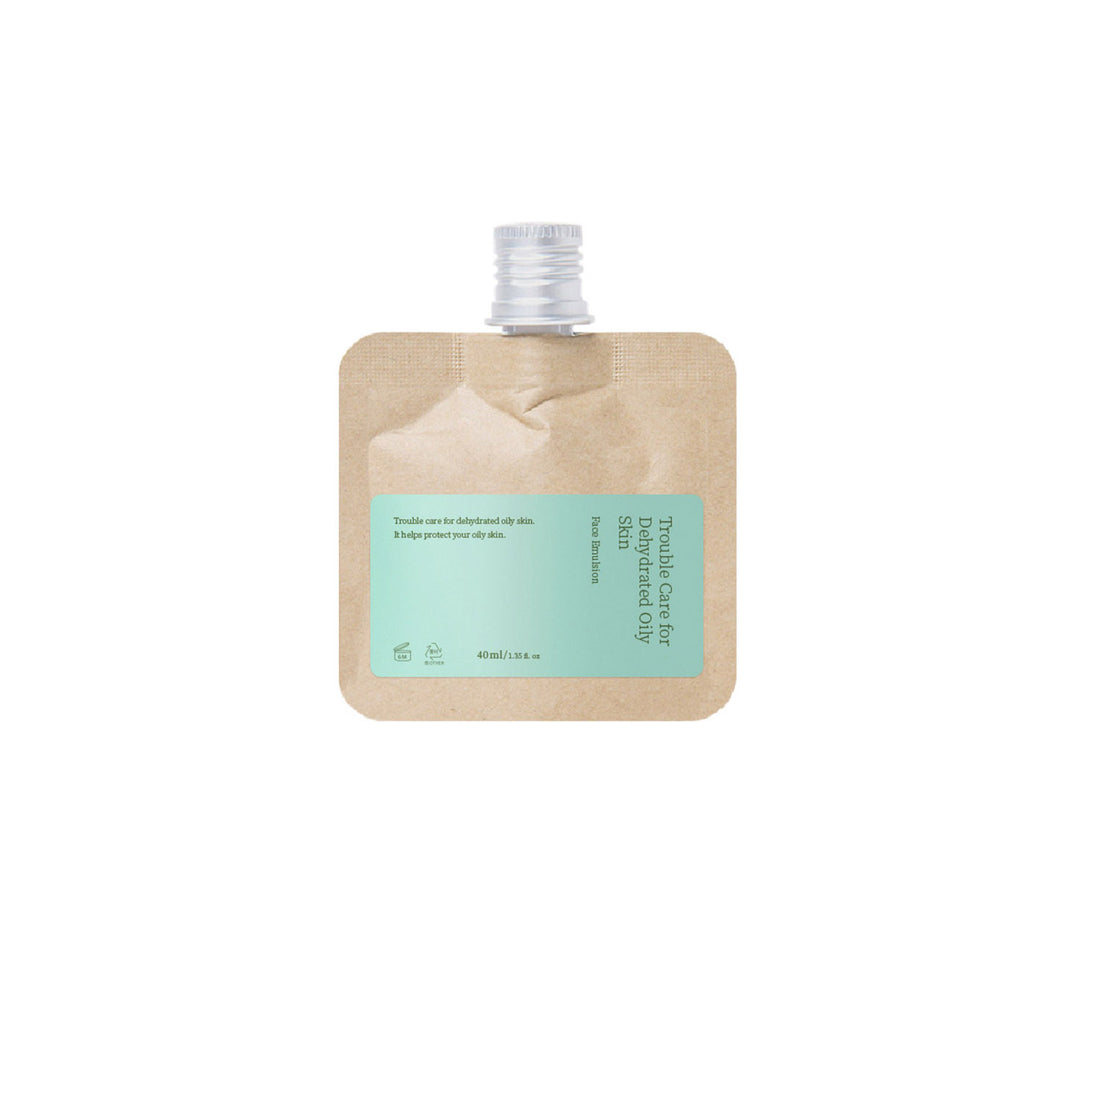 TOUN28 TOUBLE CARE FOR DEHYDRATED OILY SKIN